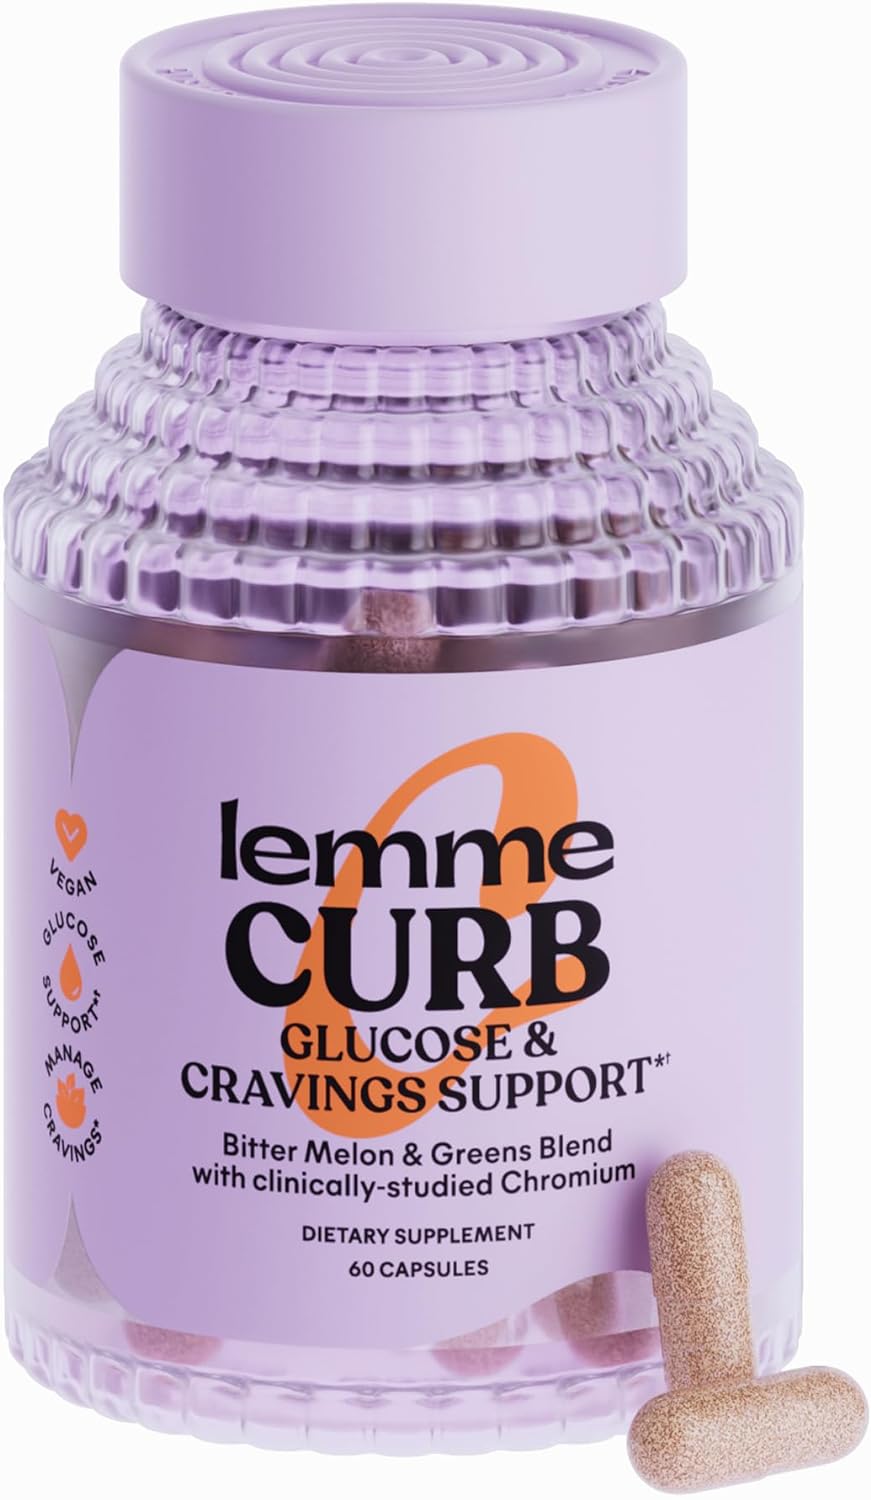 Lemme Curb - Cravings, Glucose Metabolism  Weight Management Support with Clinically Studied Chromium Picolinate, Bitter Melon, Ceylon Cinnamon, Potassium  Greens Superfood Blend, Vegan - 60 Count